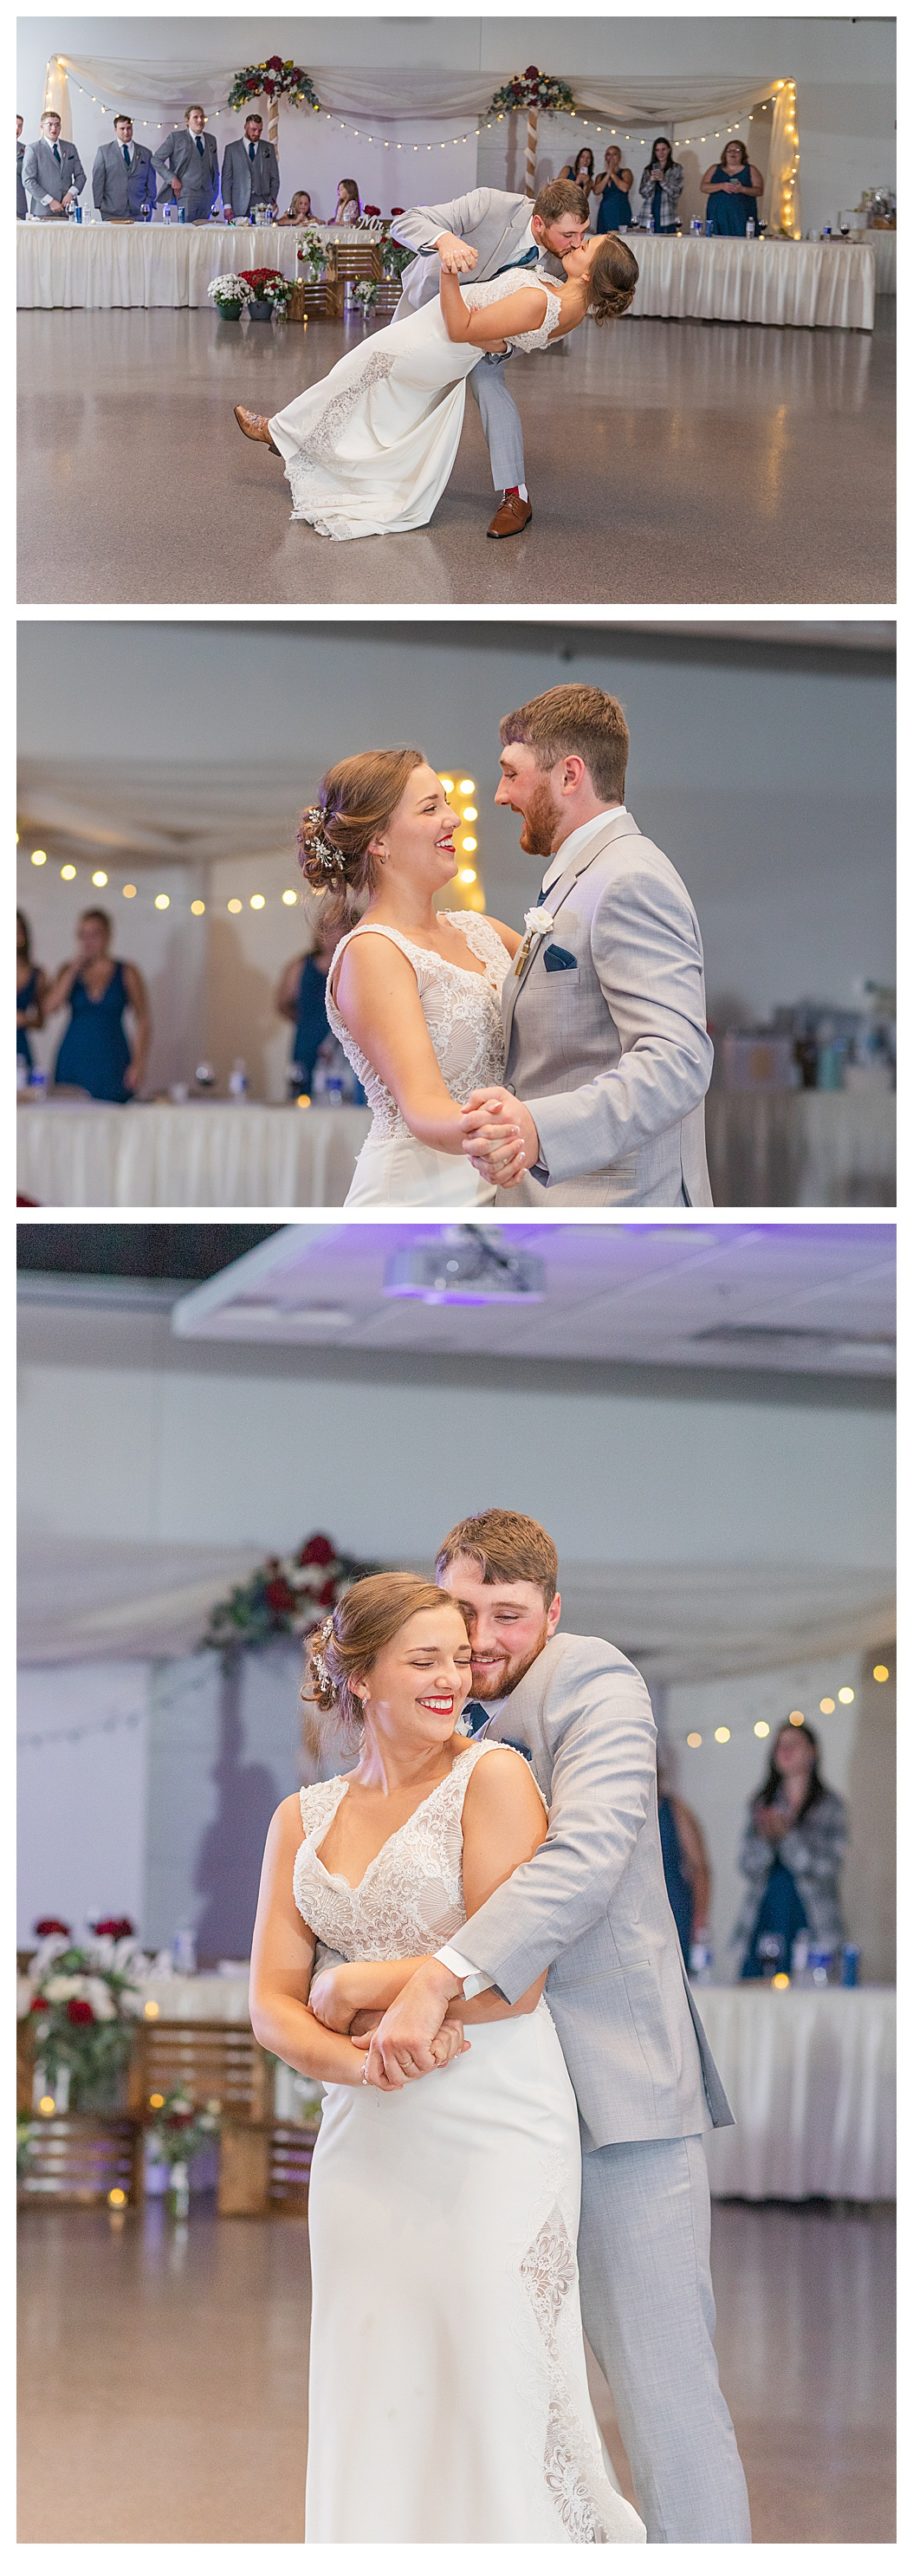 bride and groom, Gloria & Andrew Kreais dancing at their wedding reception